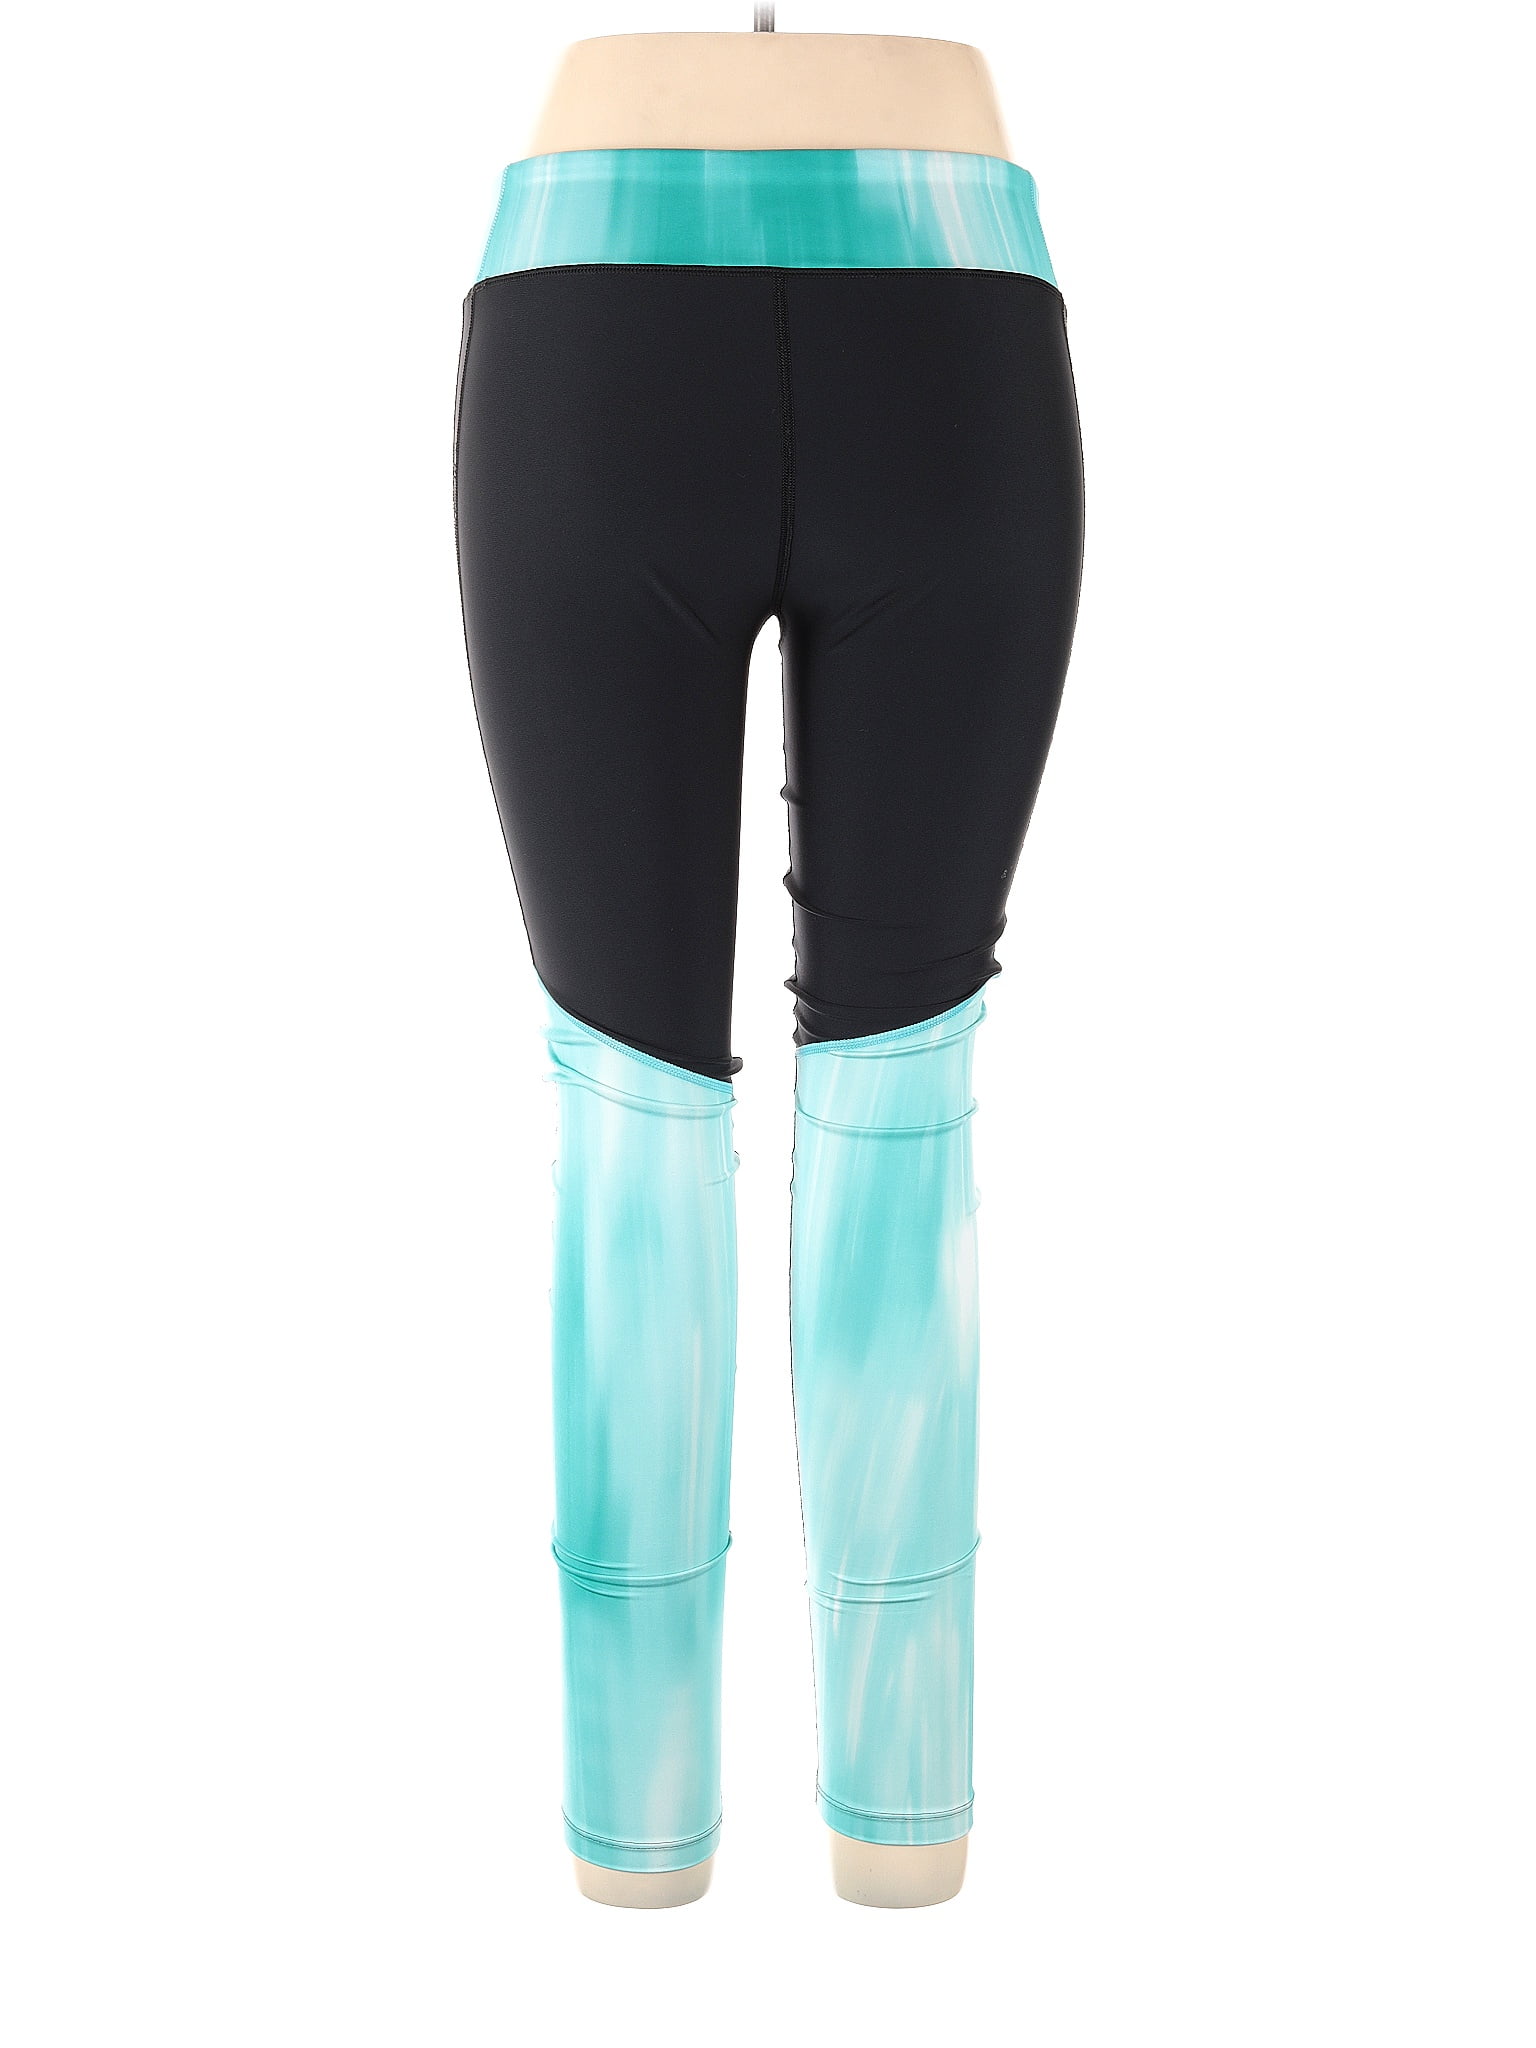 Under Armour Teal Active Pants Size M - 58% off